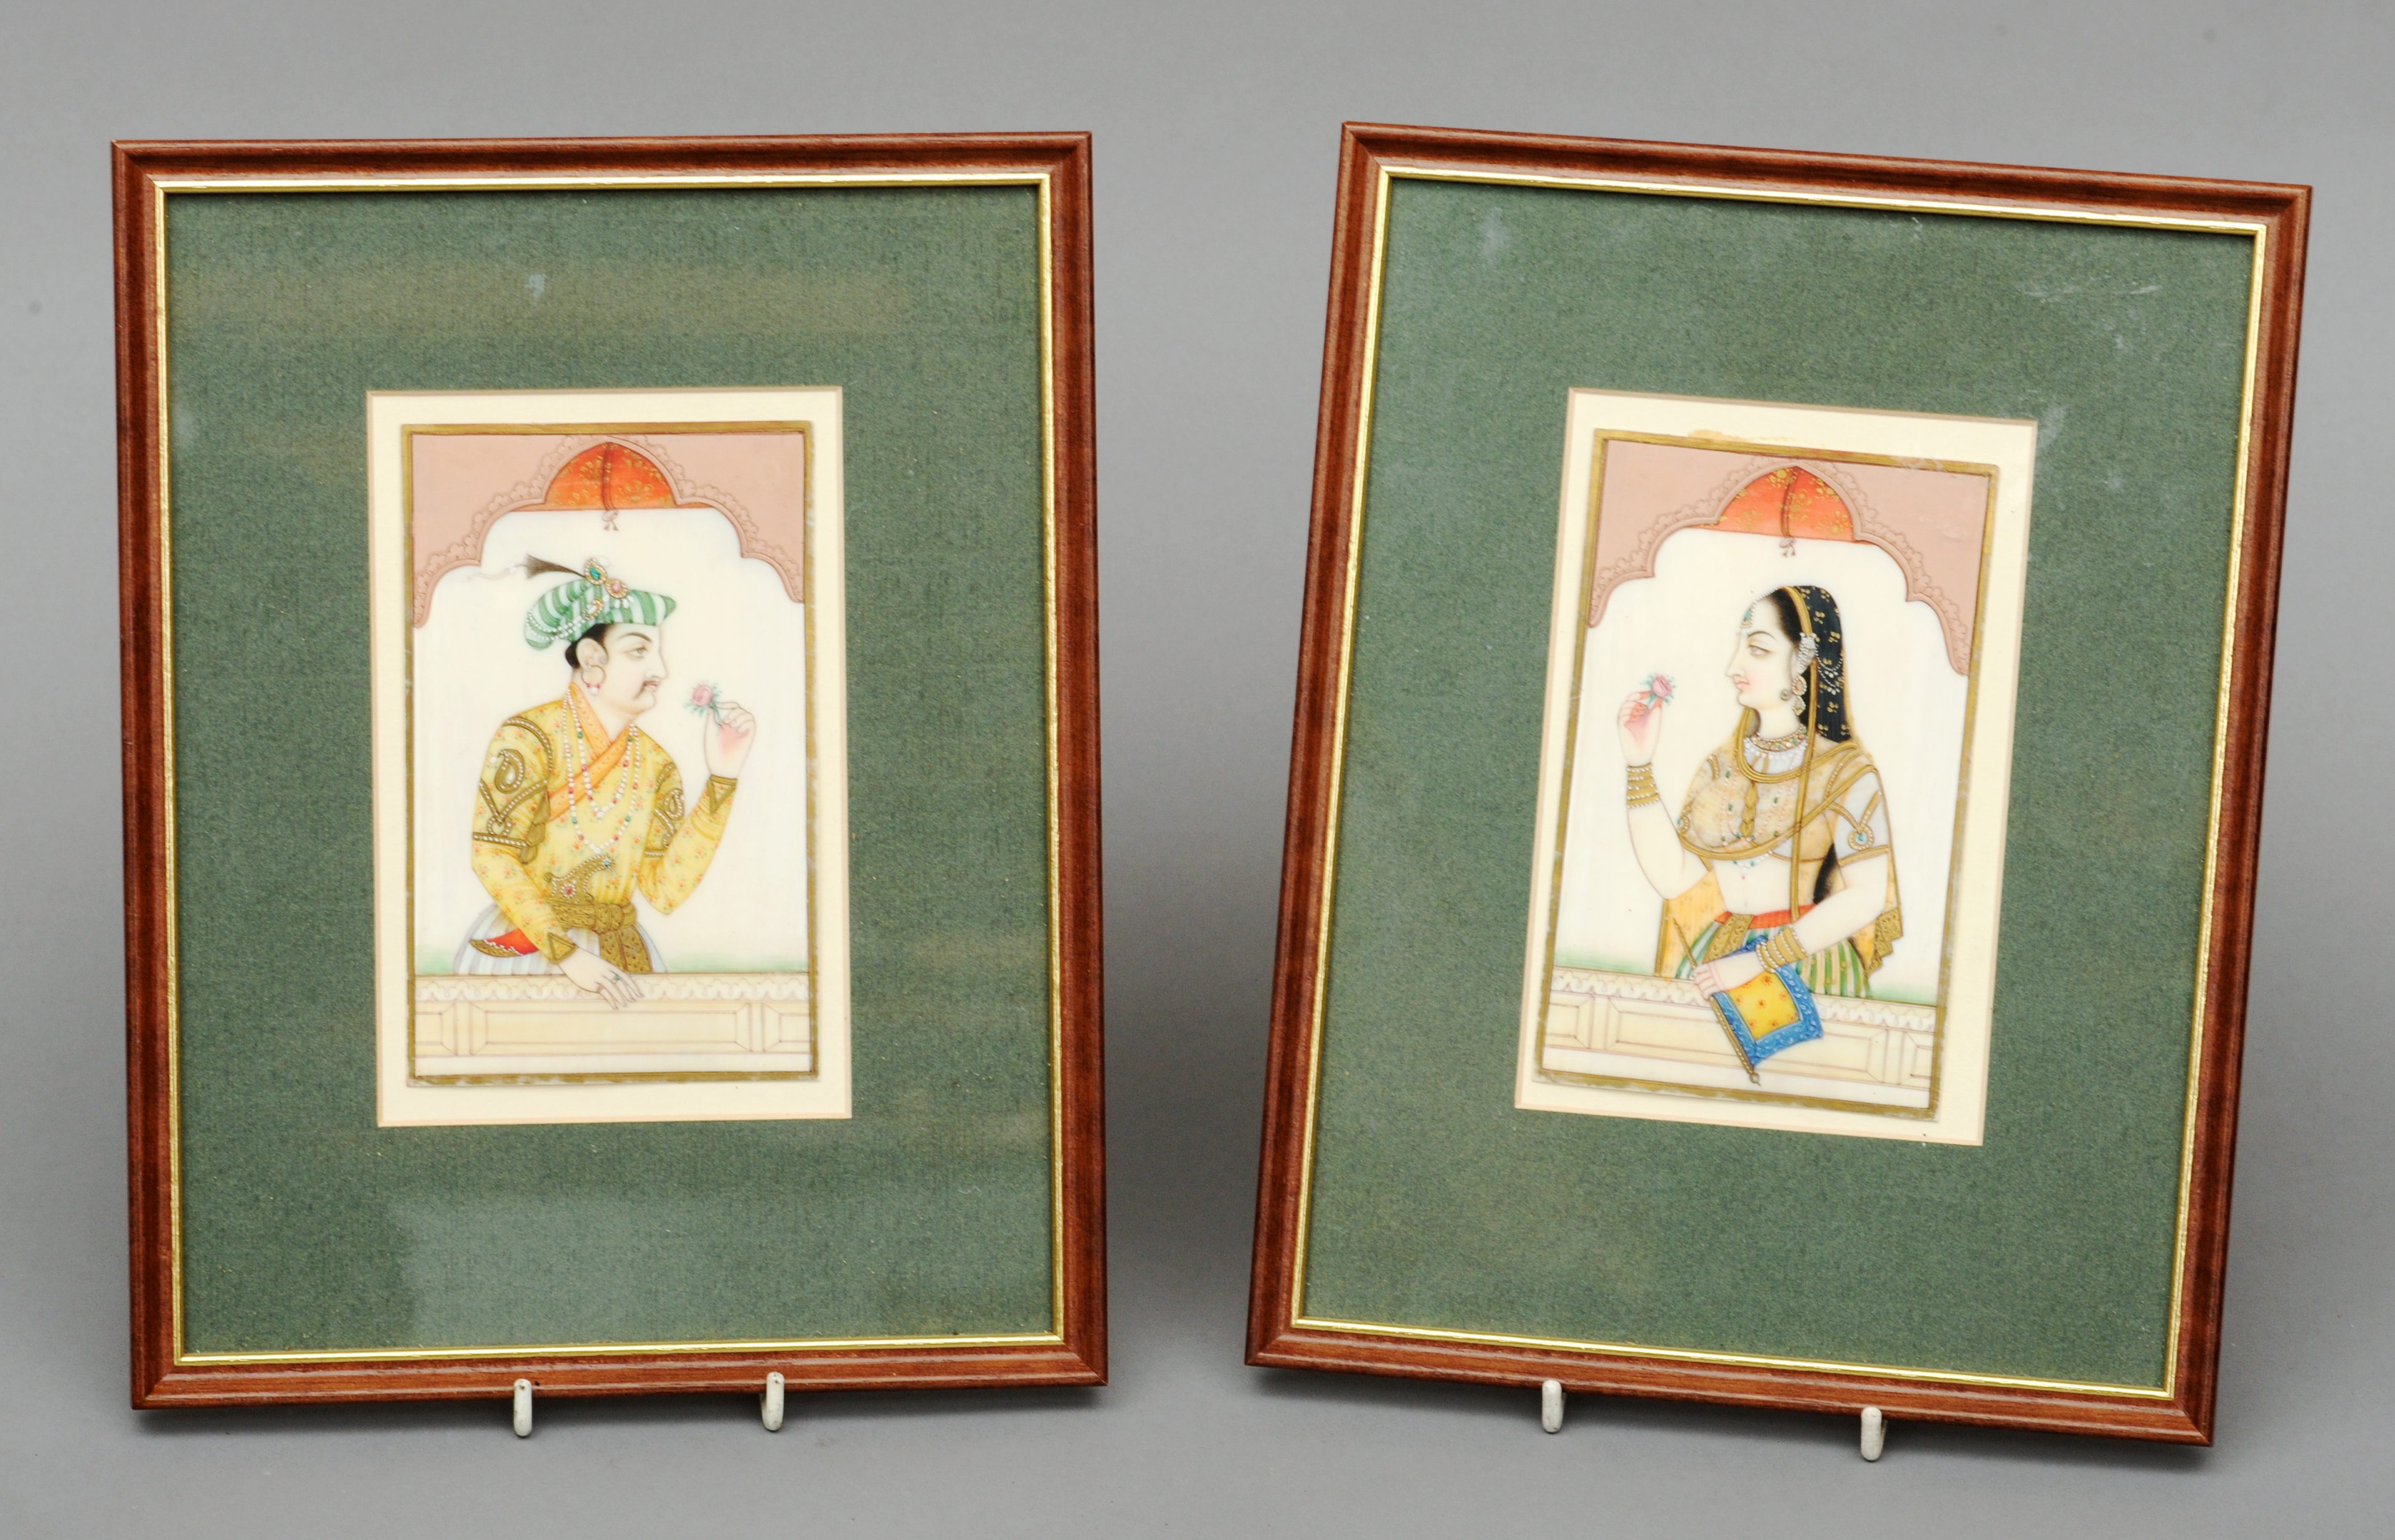 A pair of late 19th/early 20th century Indian miniatures on ivory Depicting a noble man and his